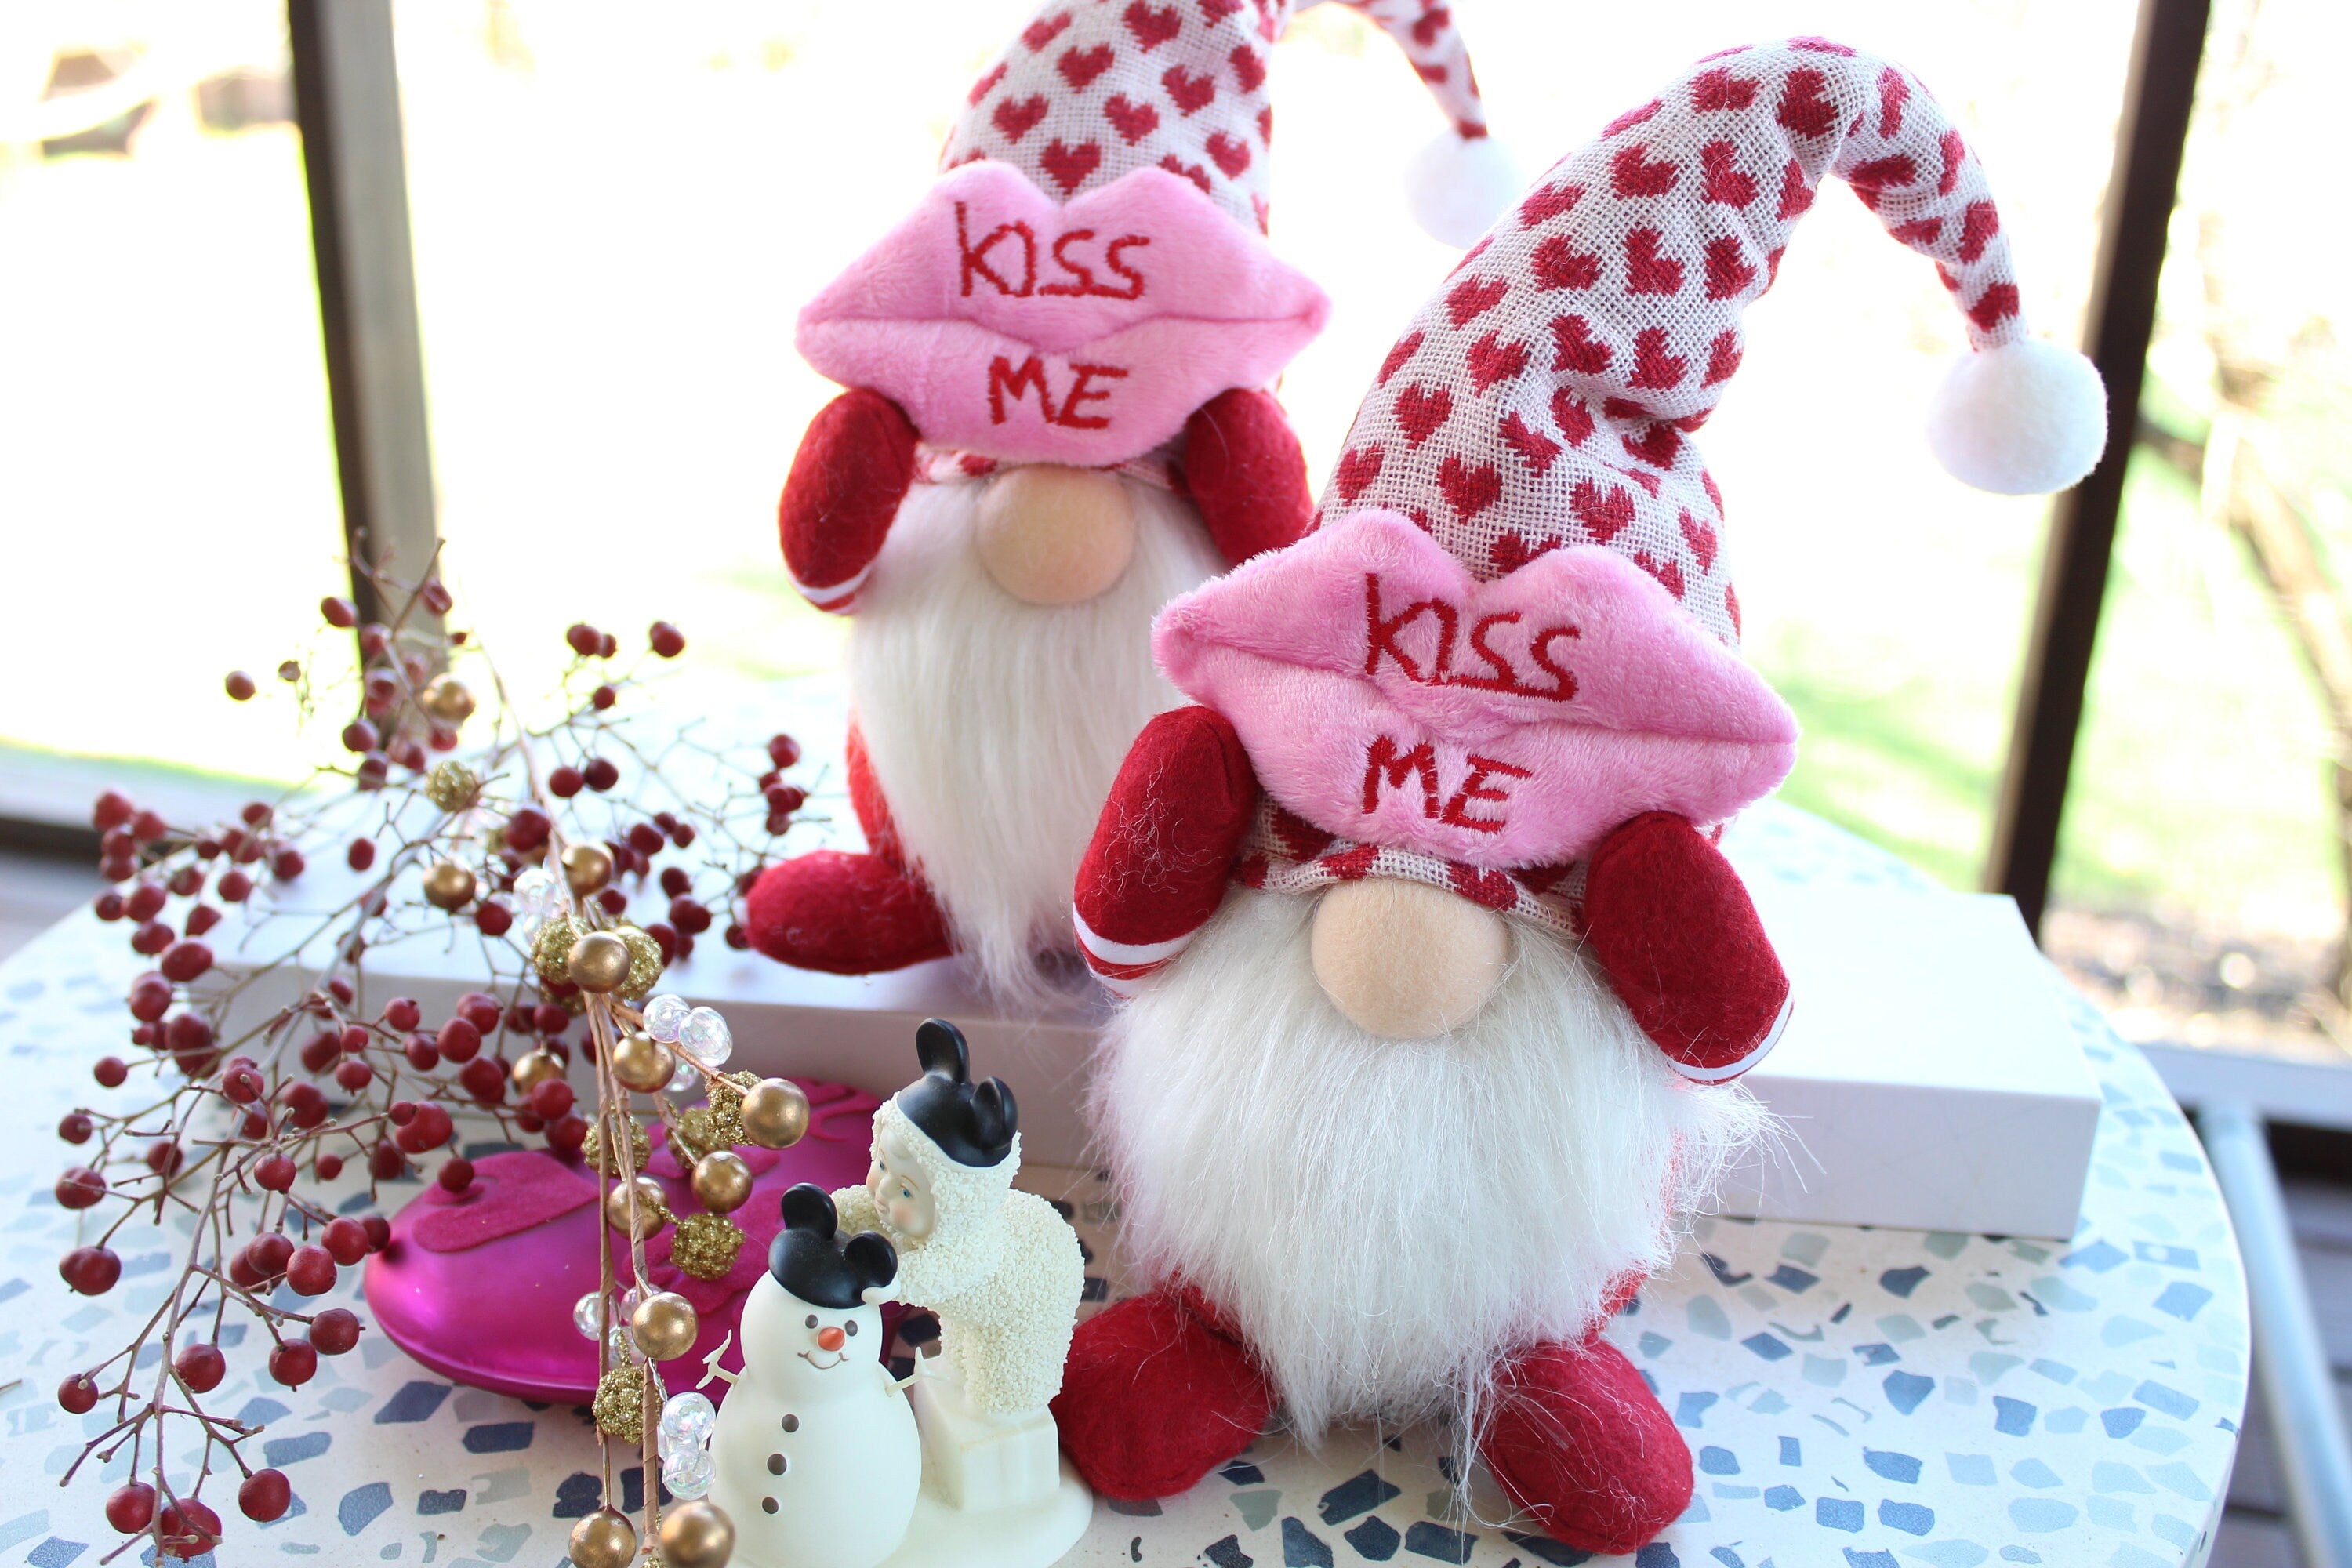 Kiss Me gnome, Love you gnome, valentines present for her, valentine gift for her, heart gnome gift for her